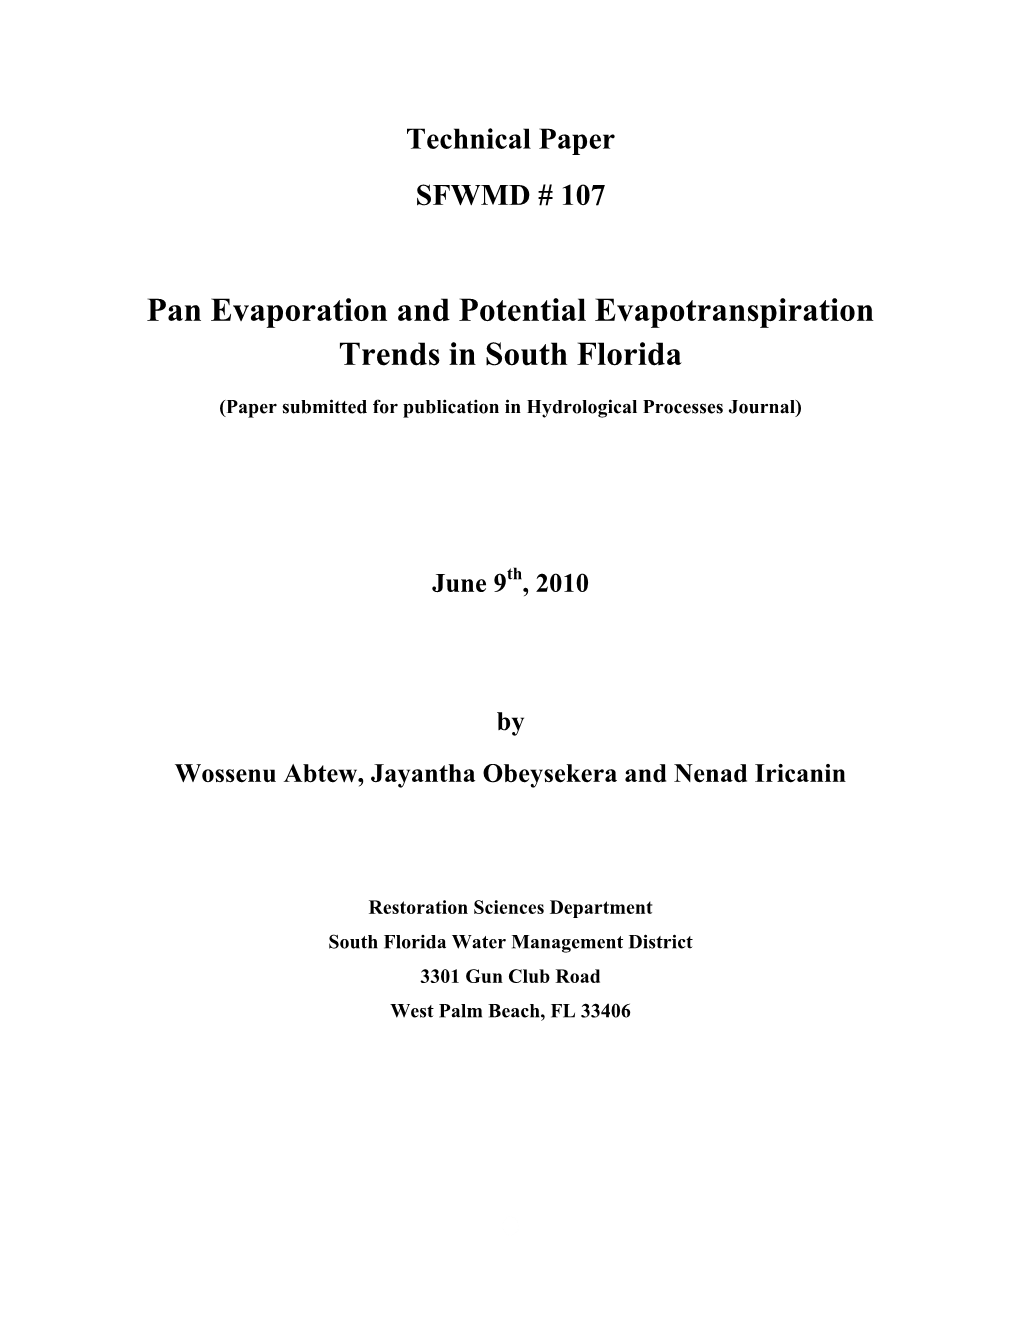 Pan Evaporation and Potential Evapotranspiration Trends in South Florida